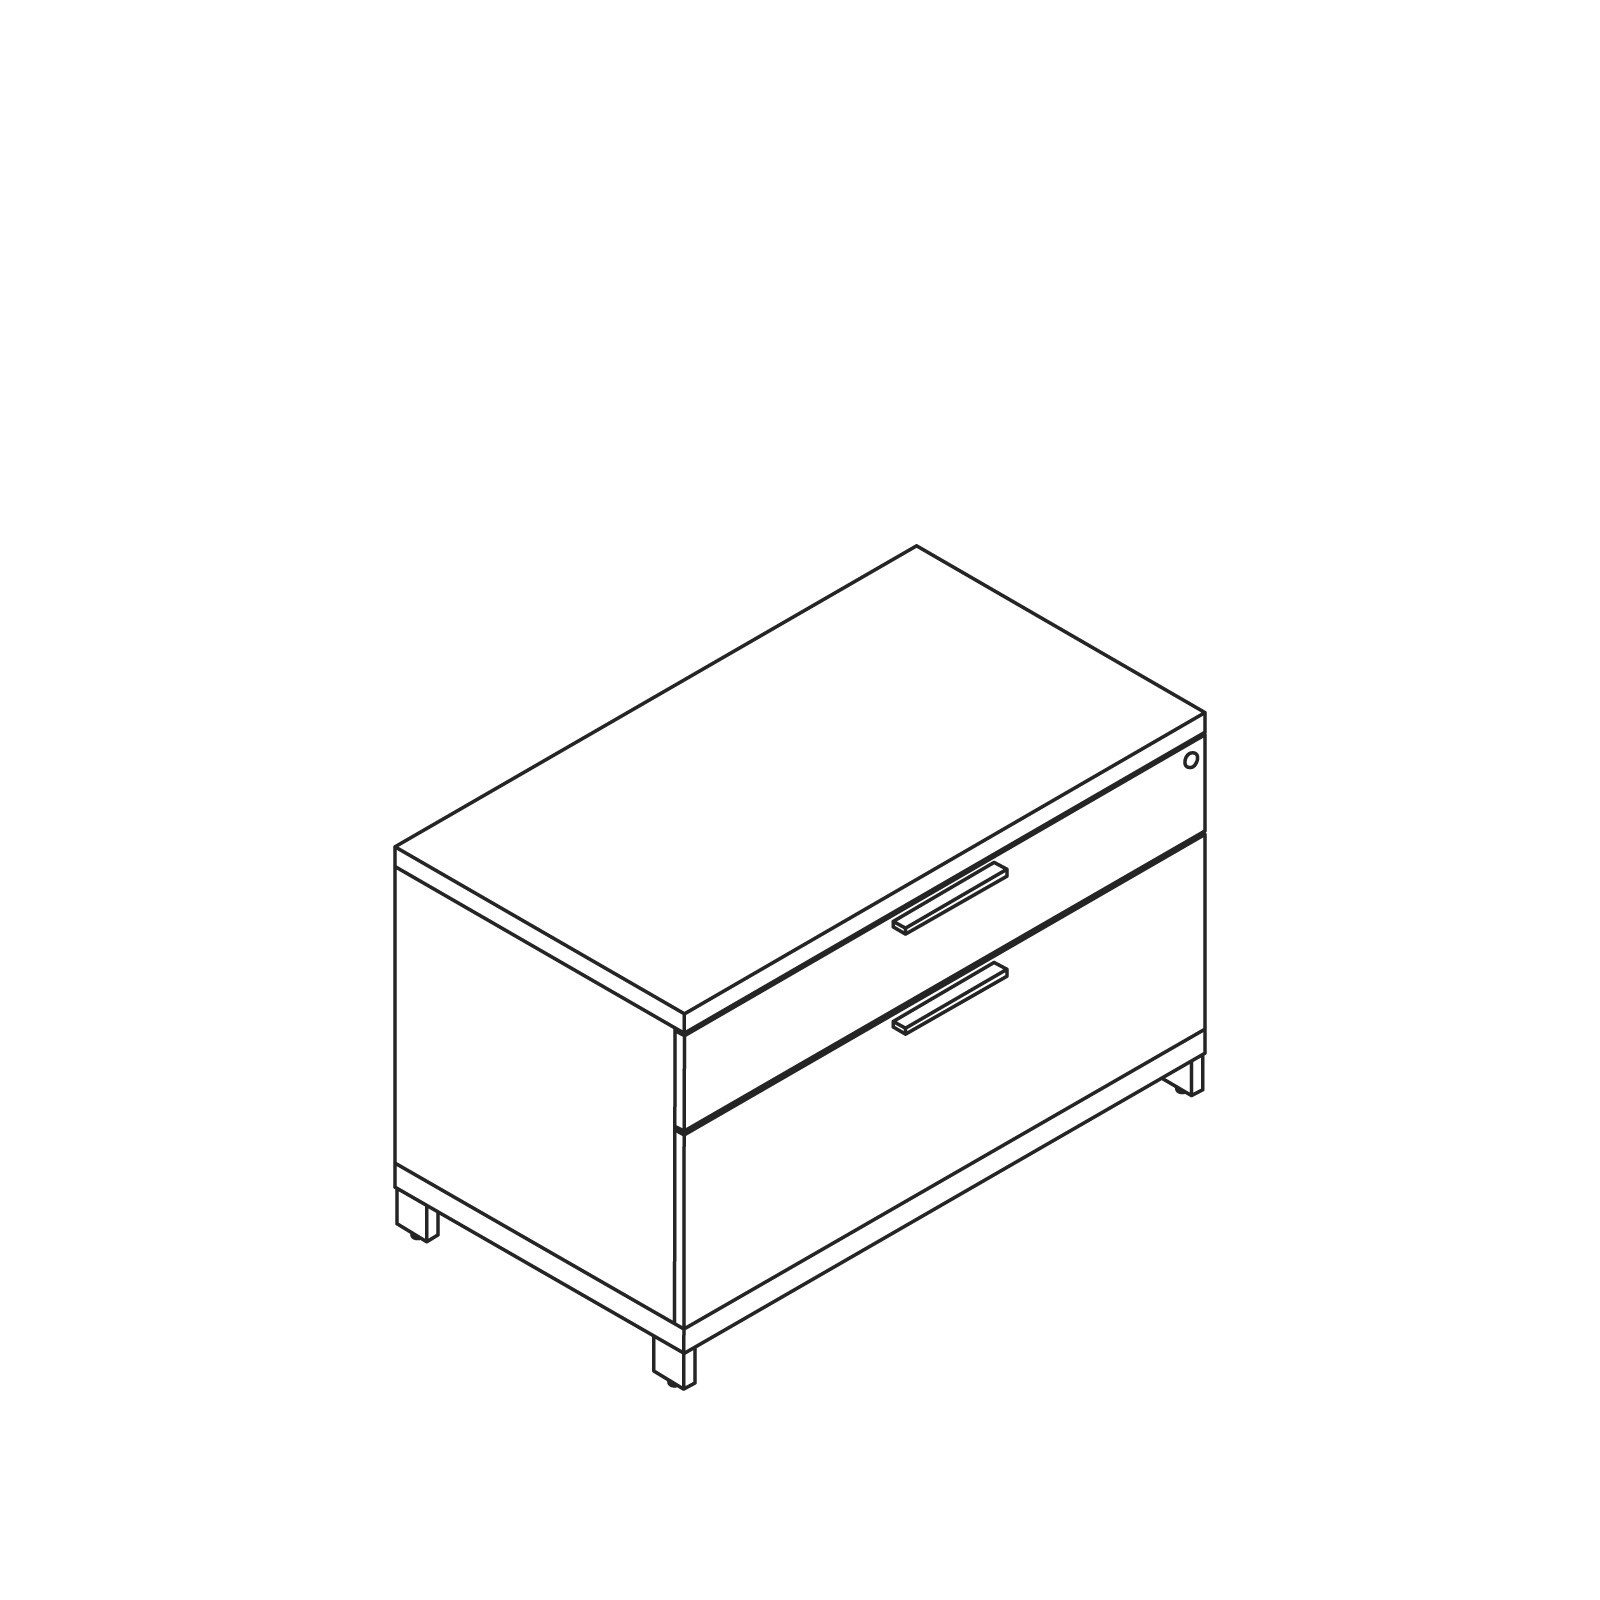 A line drawing - Meridian Credenza